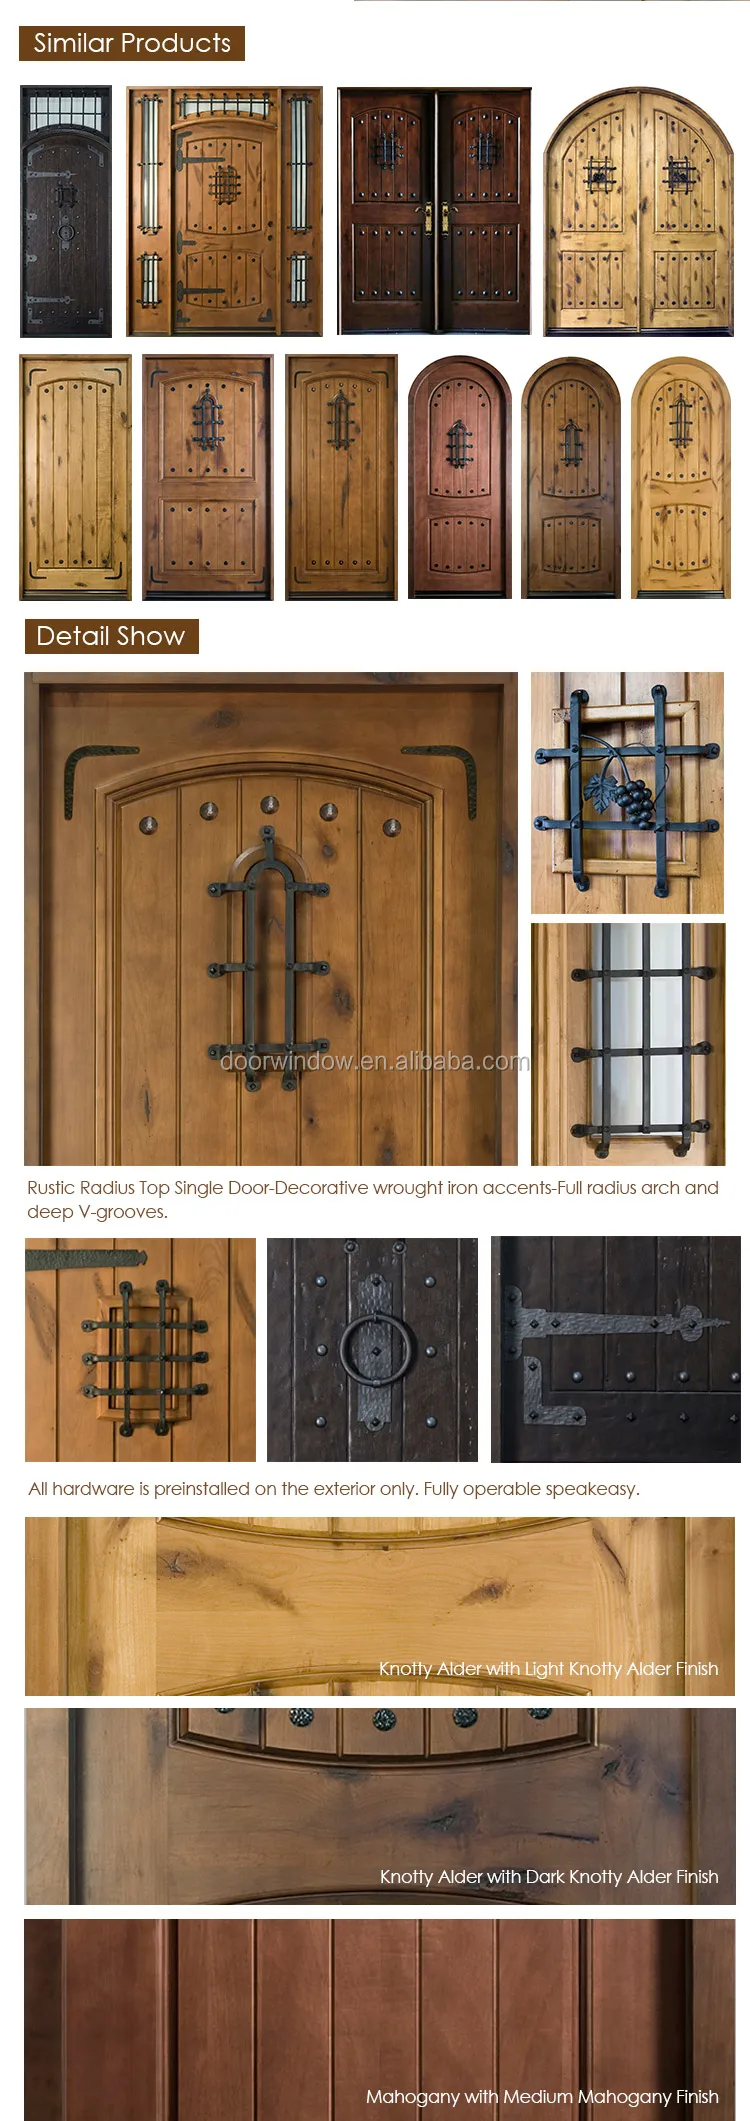 Arched top iron clavos door design with Q-Lon weather strip insulation and solid wood front door frame